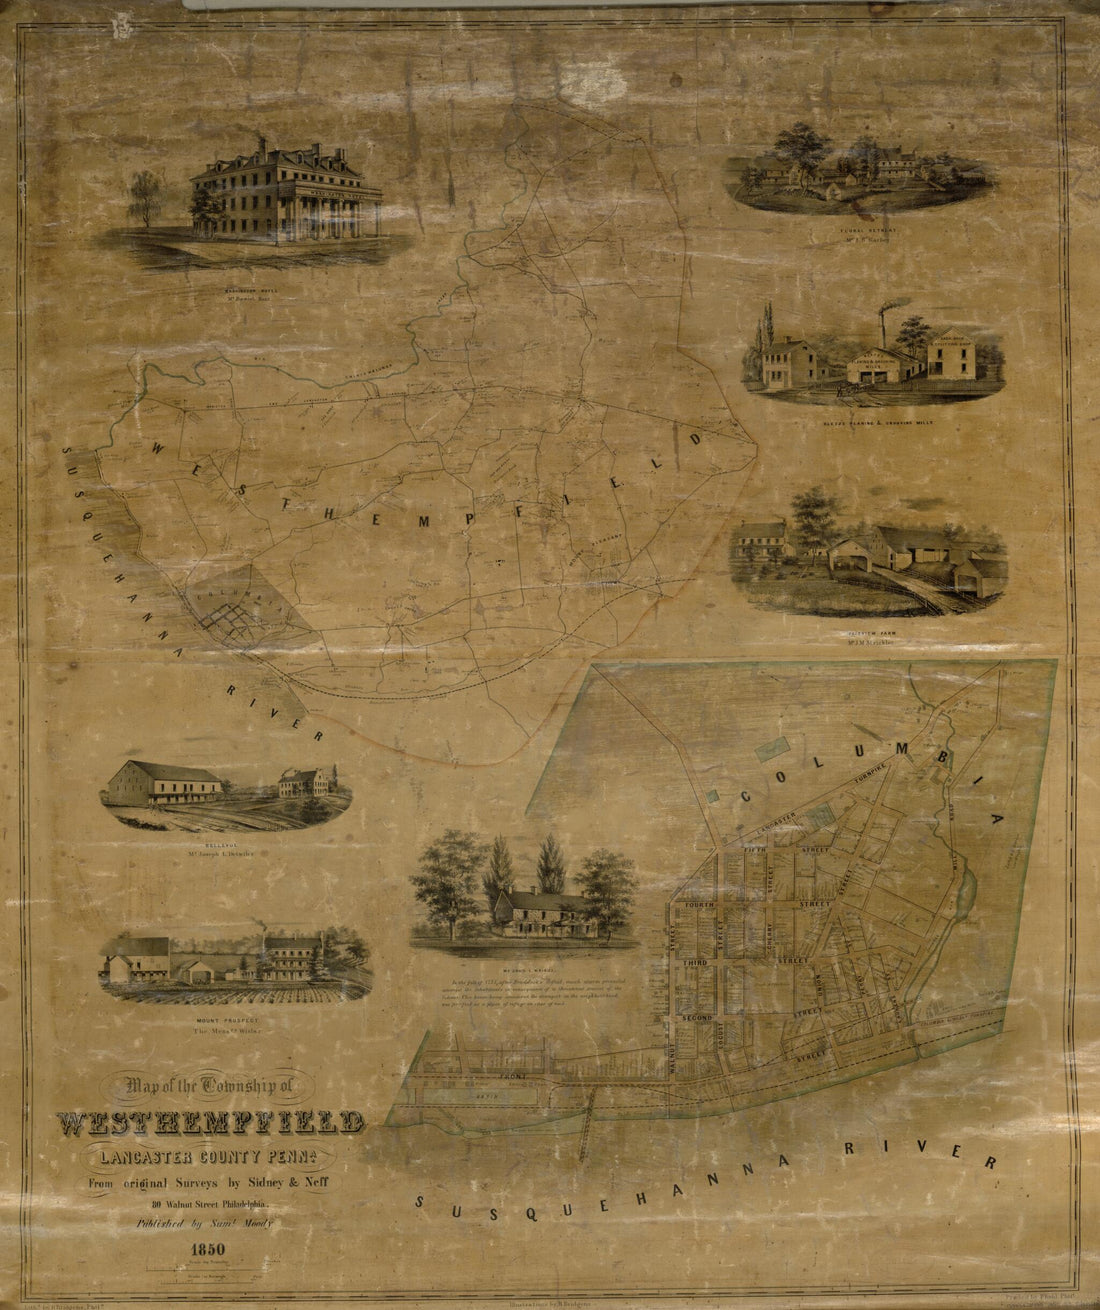 This old map of Map of the Township of West Hempfield, Lancaster County Penn&